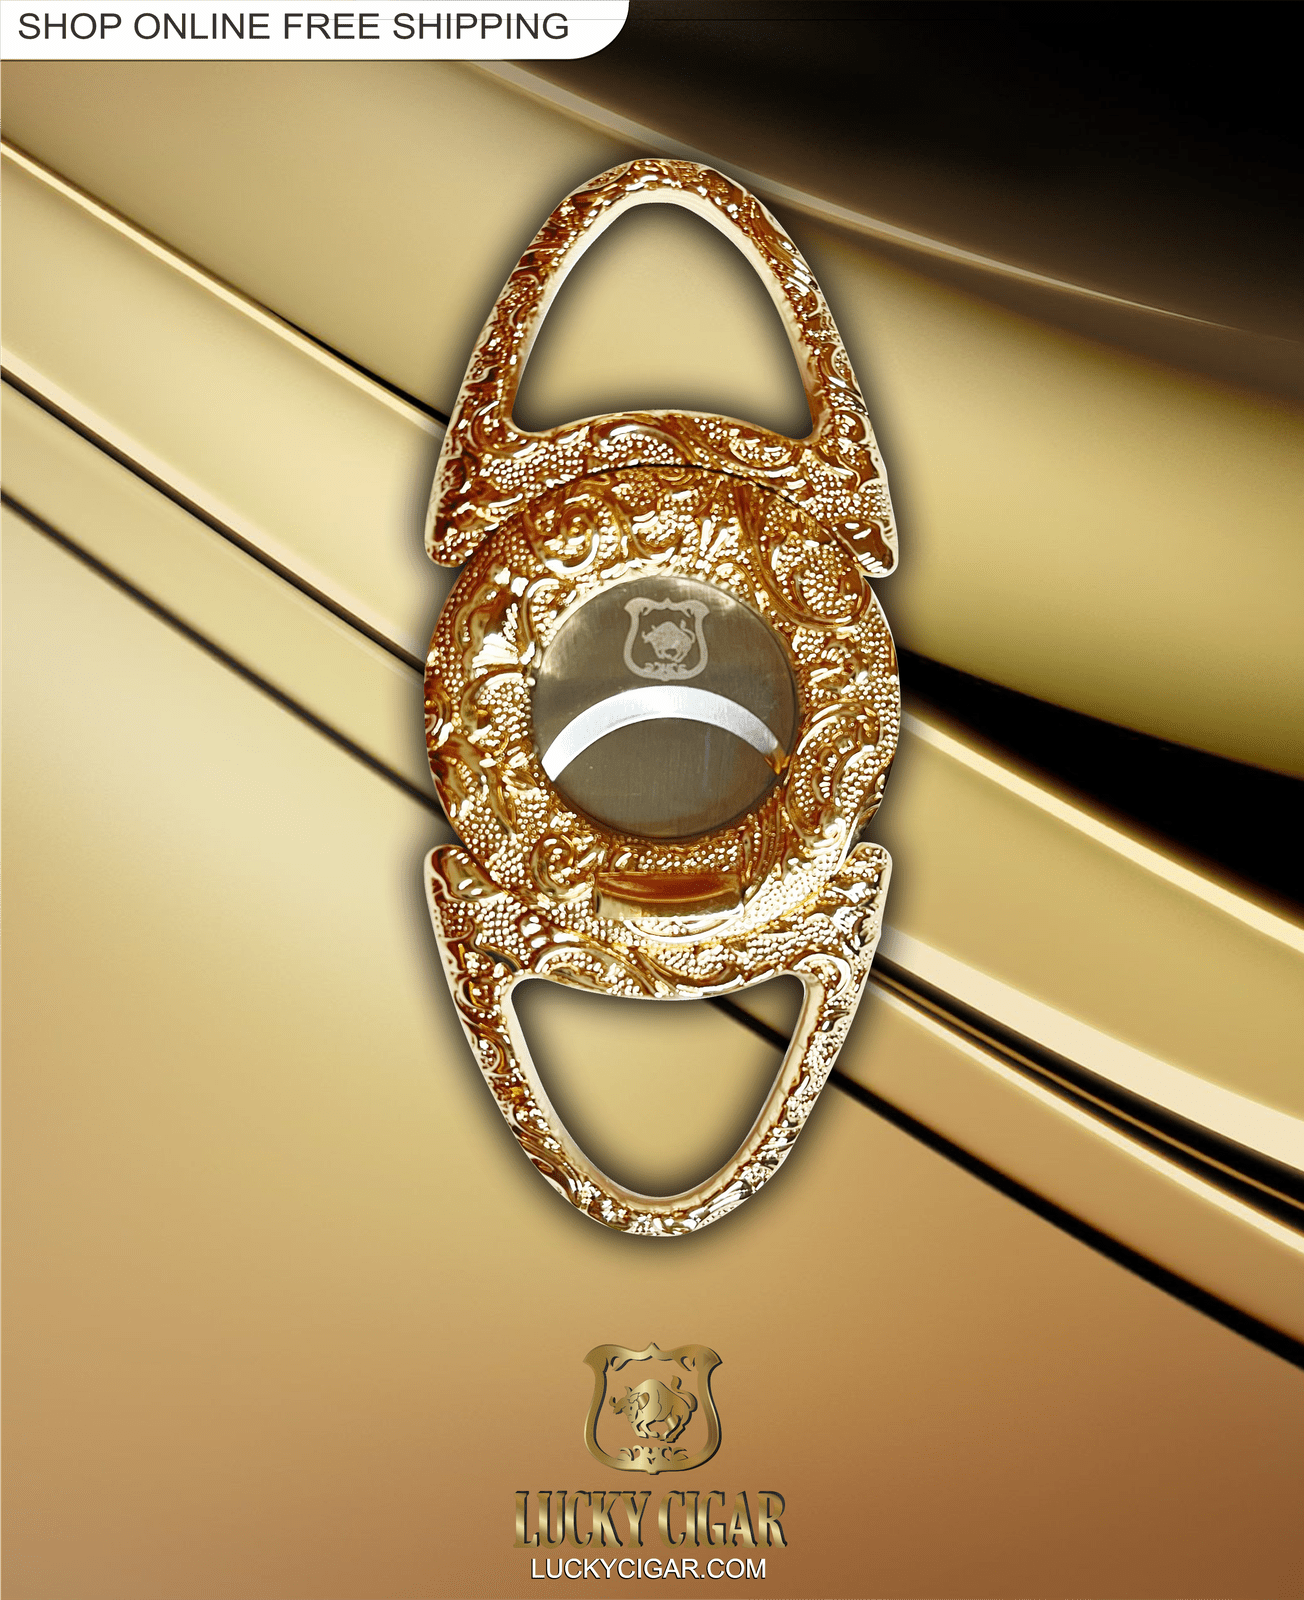 Cigar Lifestyle Accessories: Cigar Cutter in Gold with Raised Pattern